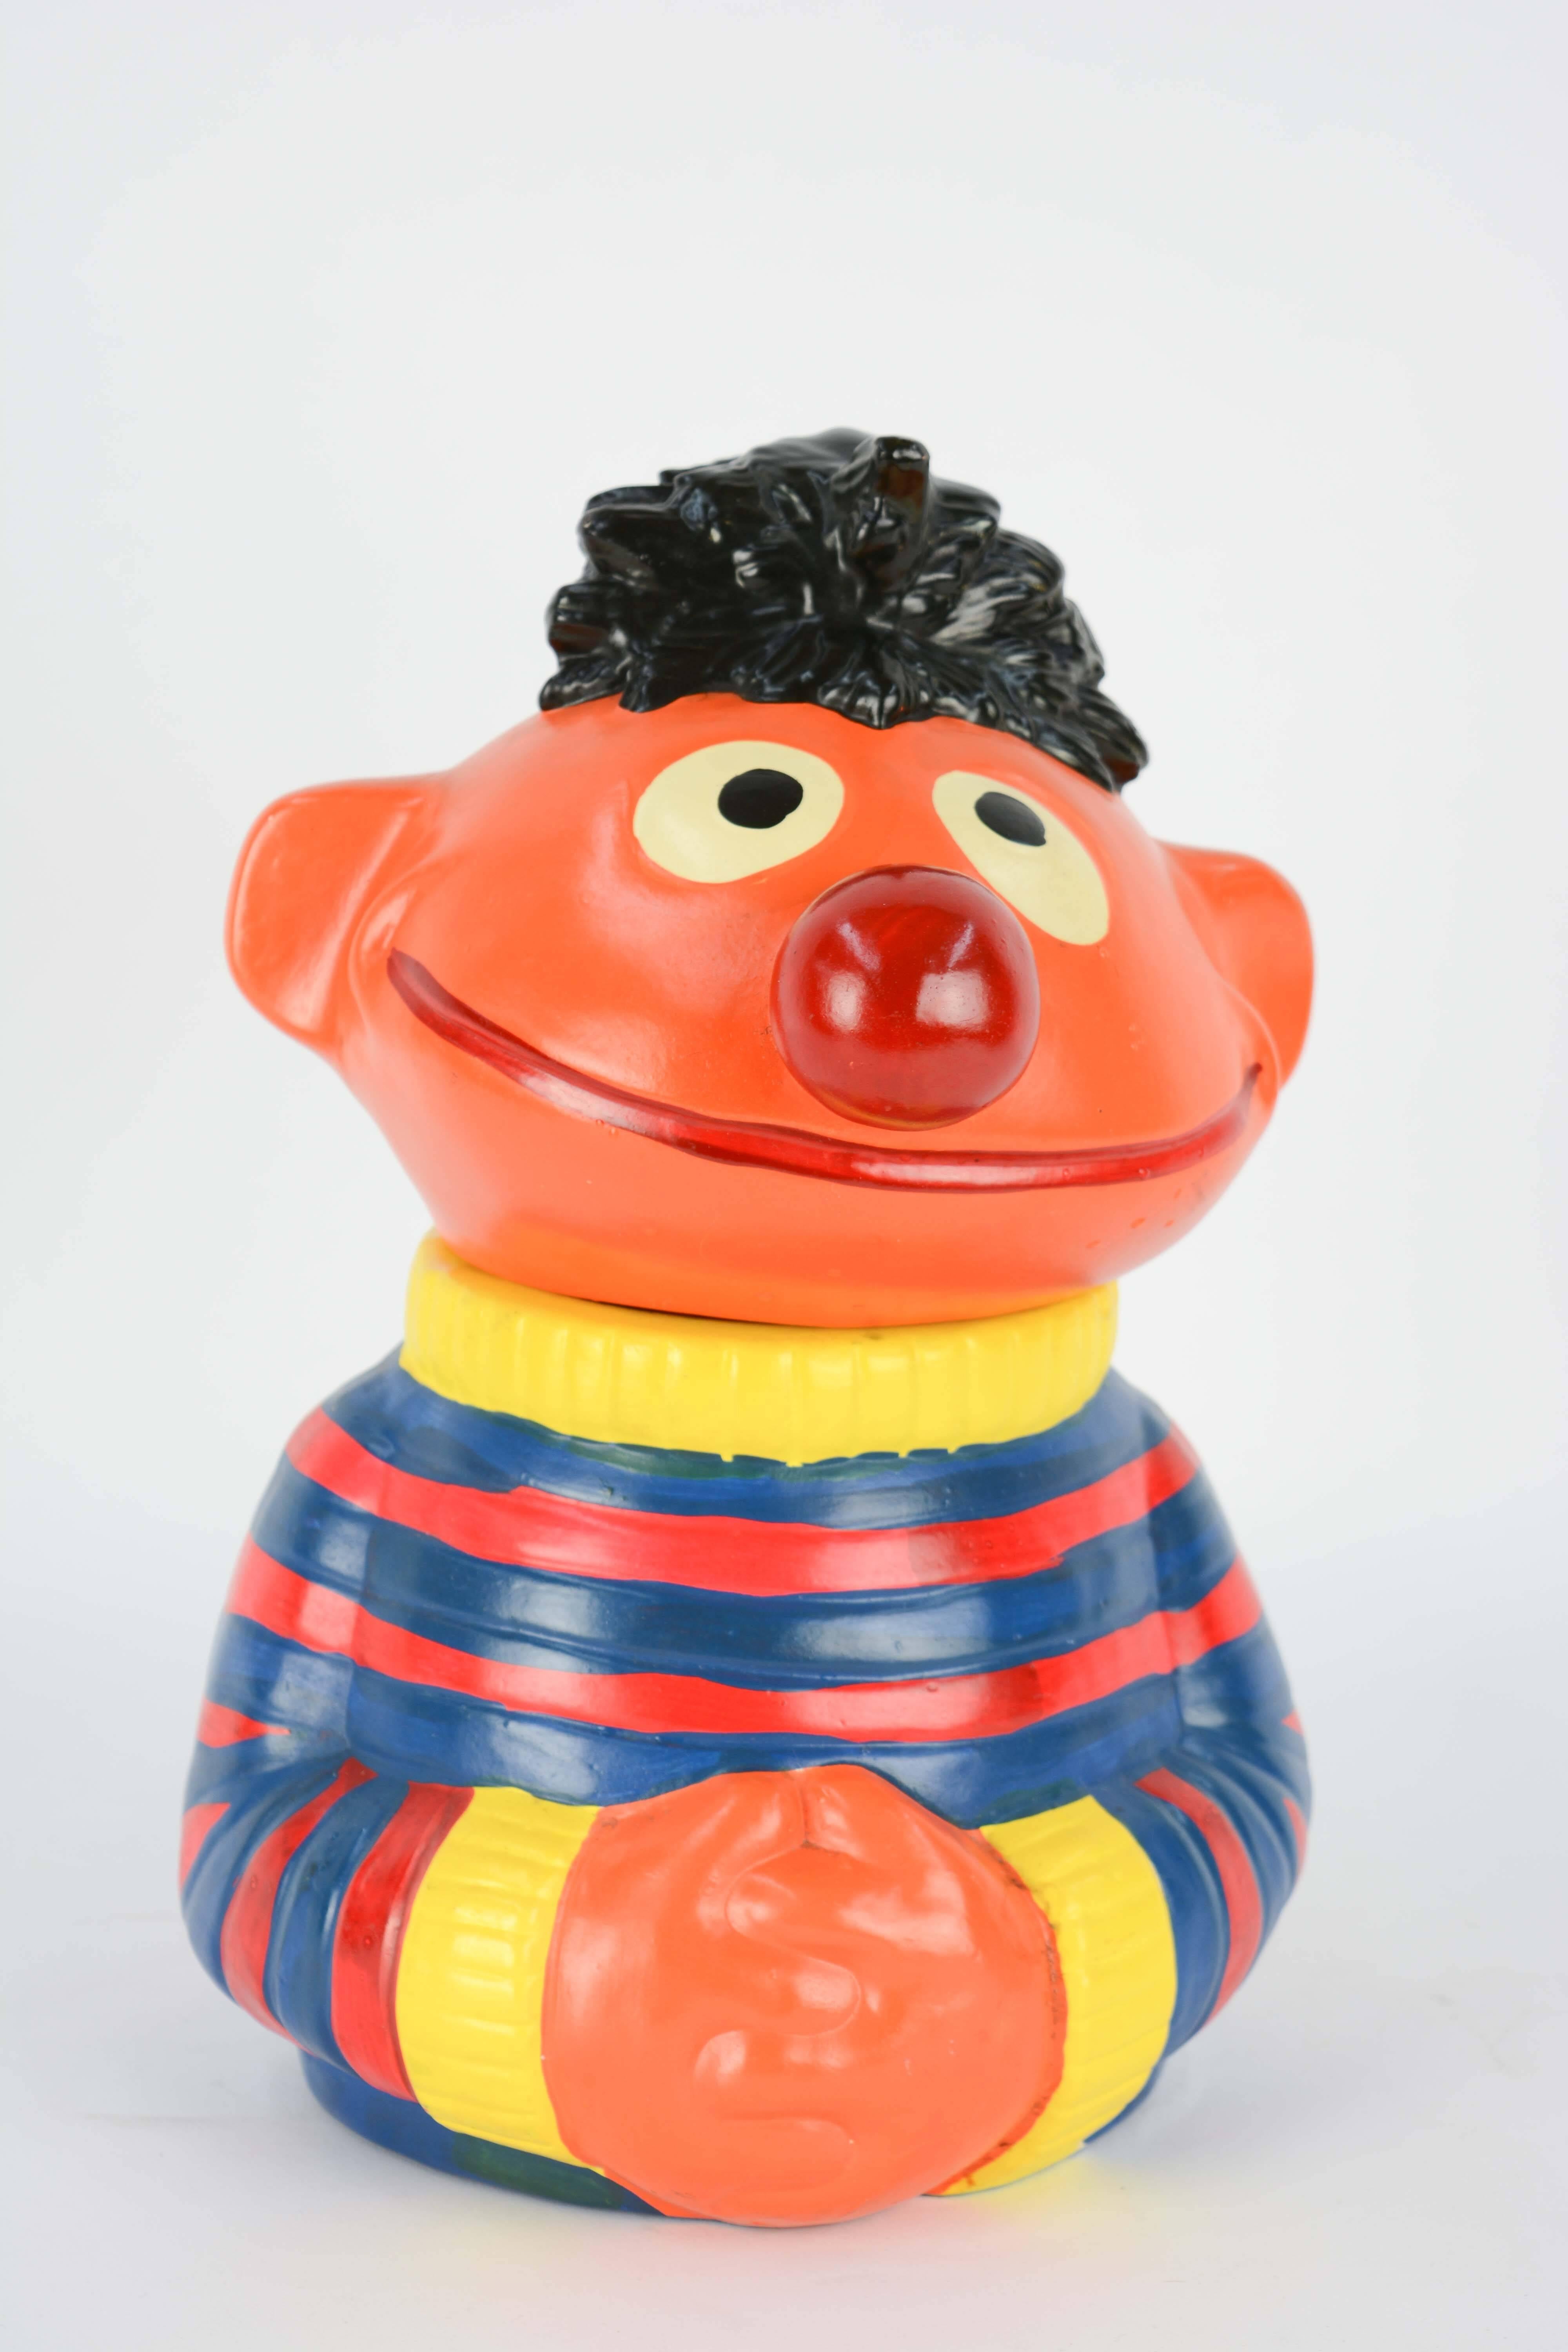 American Amazing Muppet's Sesame Street Cookie Jar Collection from 1973 For Sale